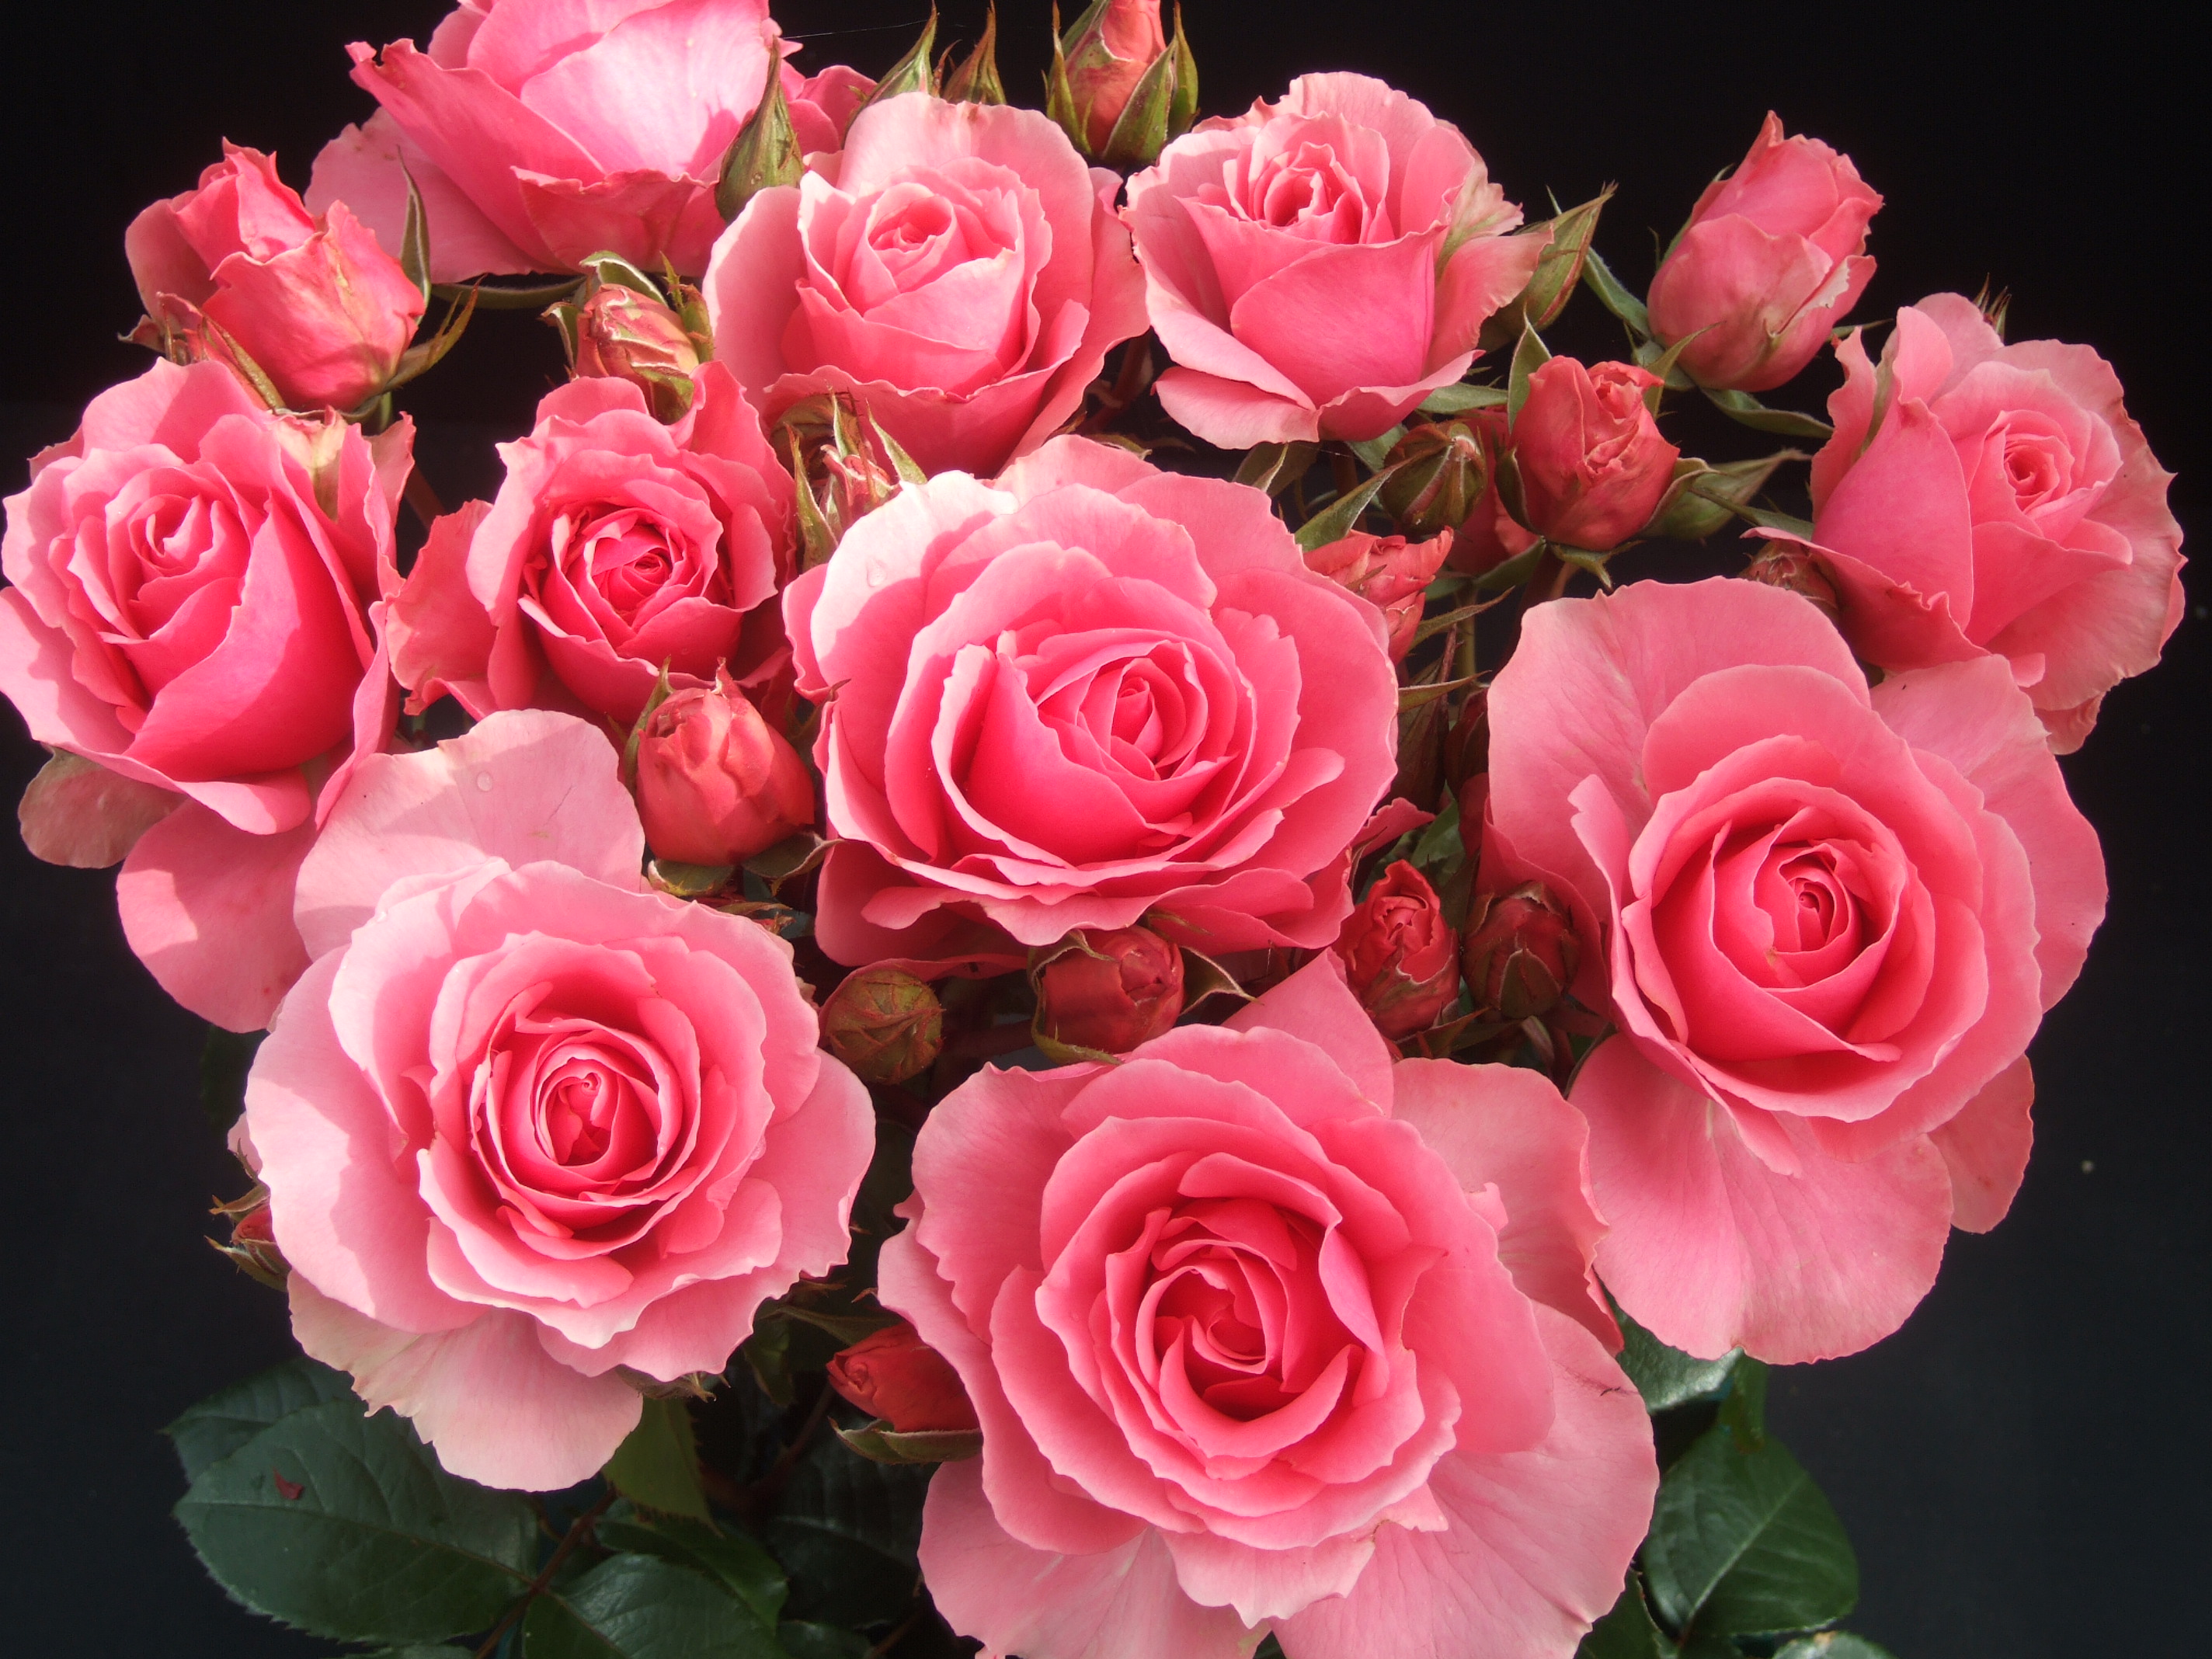 Rose 'You're Beautiful', Rose of the Year 2013 | garden nomey